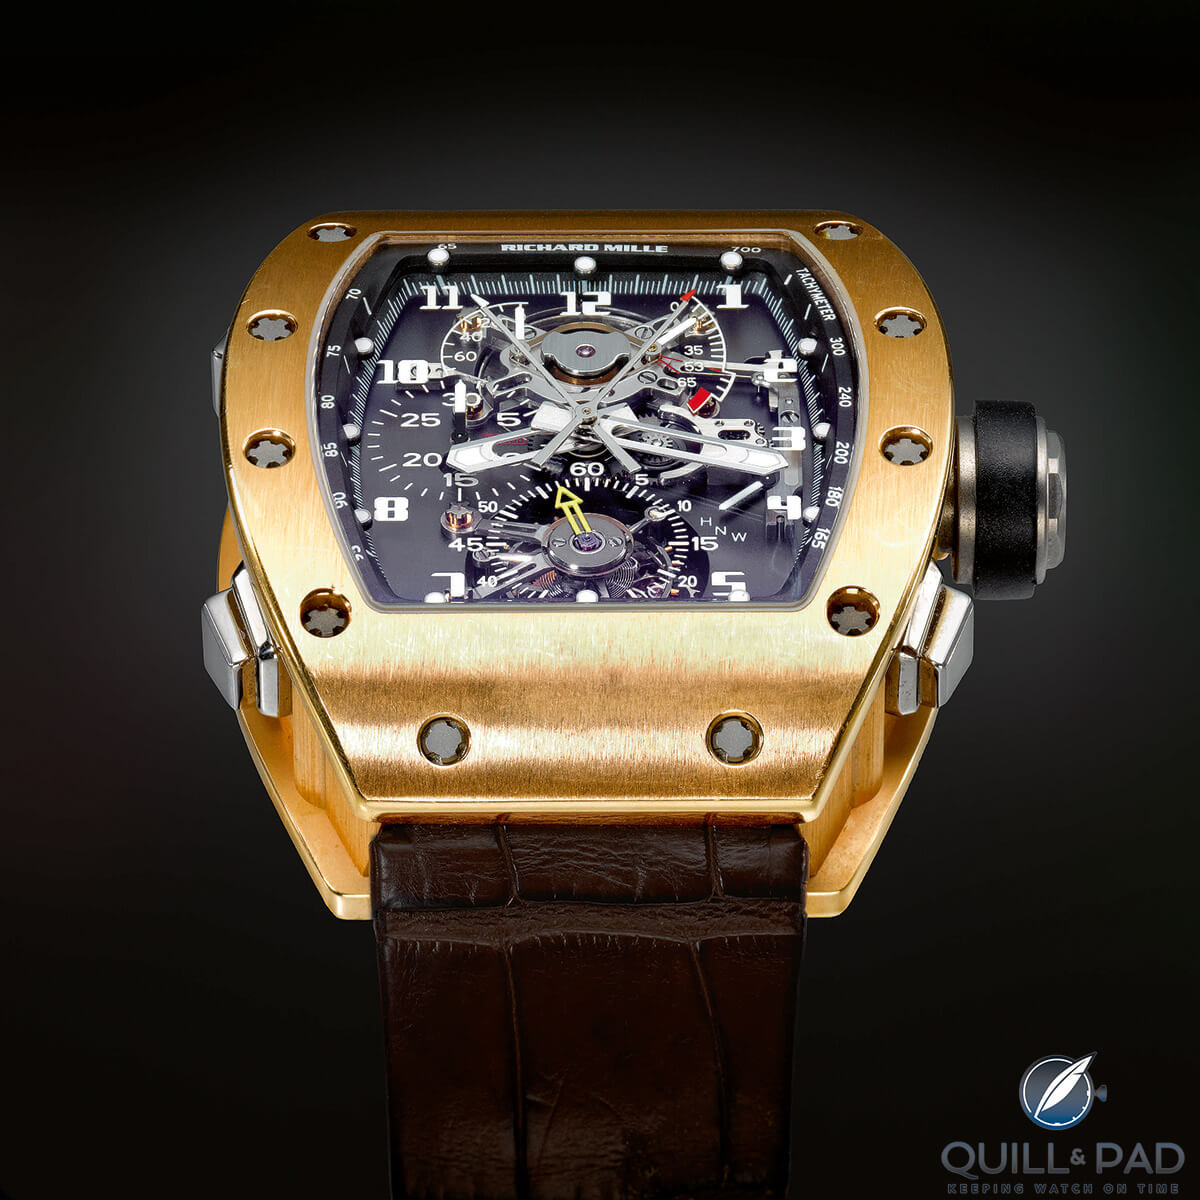 This pink gold Richard Mille RM008 from 2010 was Sotheby’s second best performer in the June 2017 auction